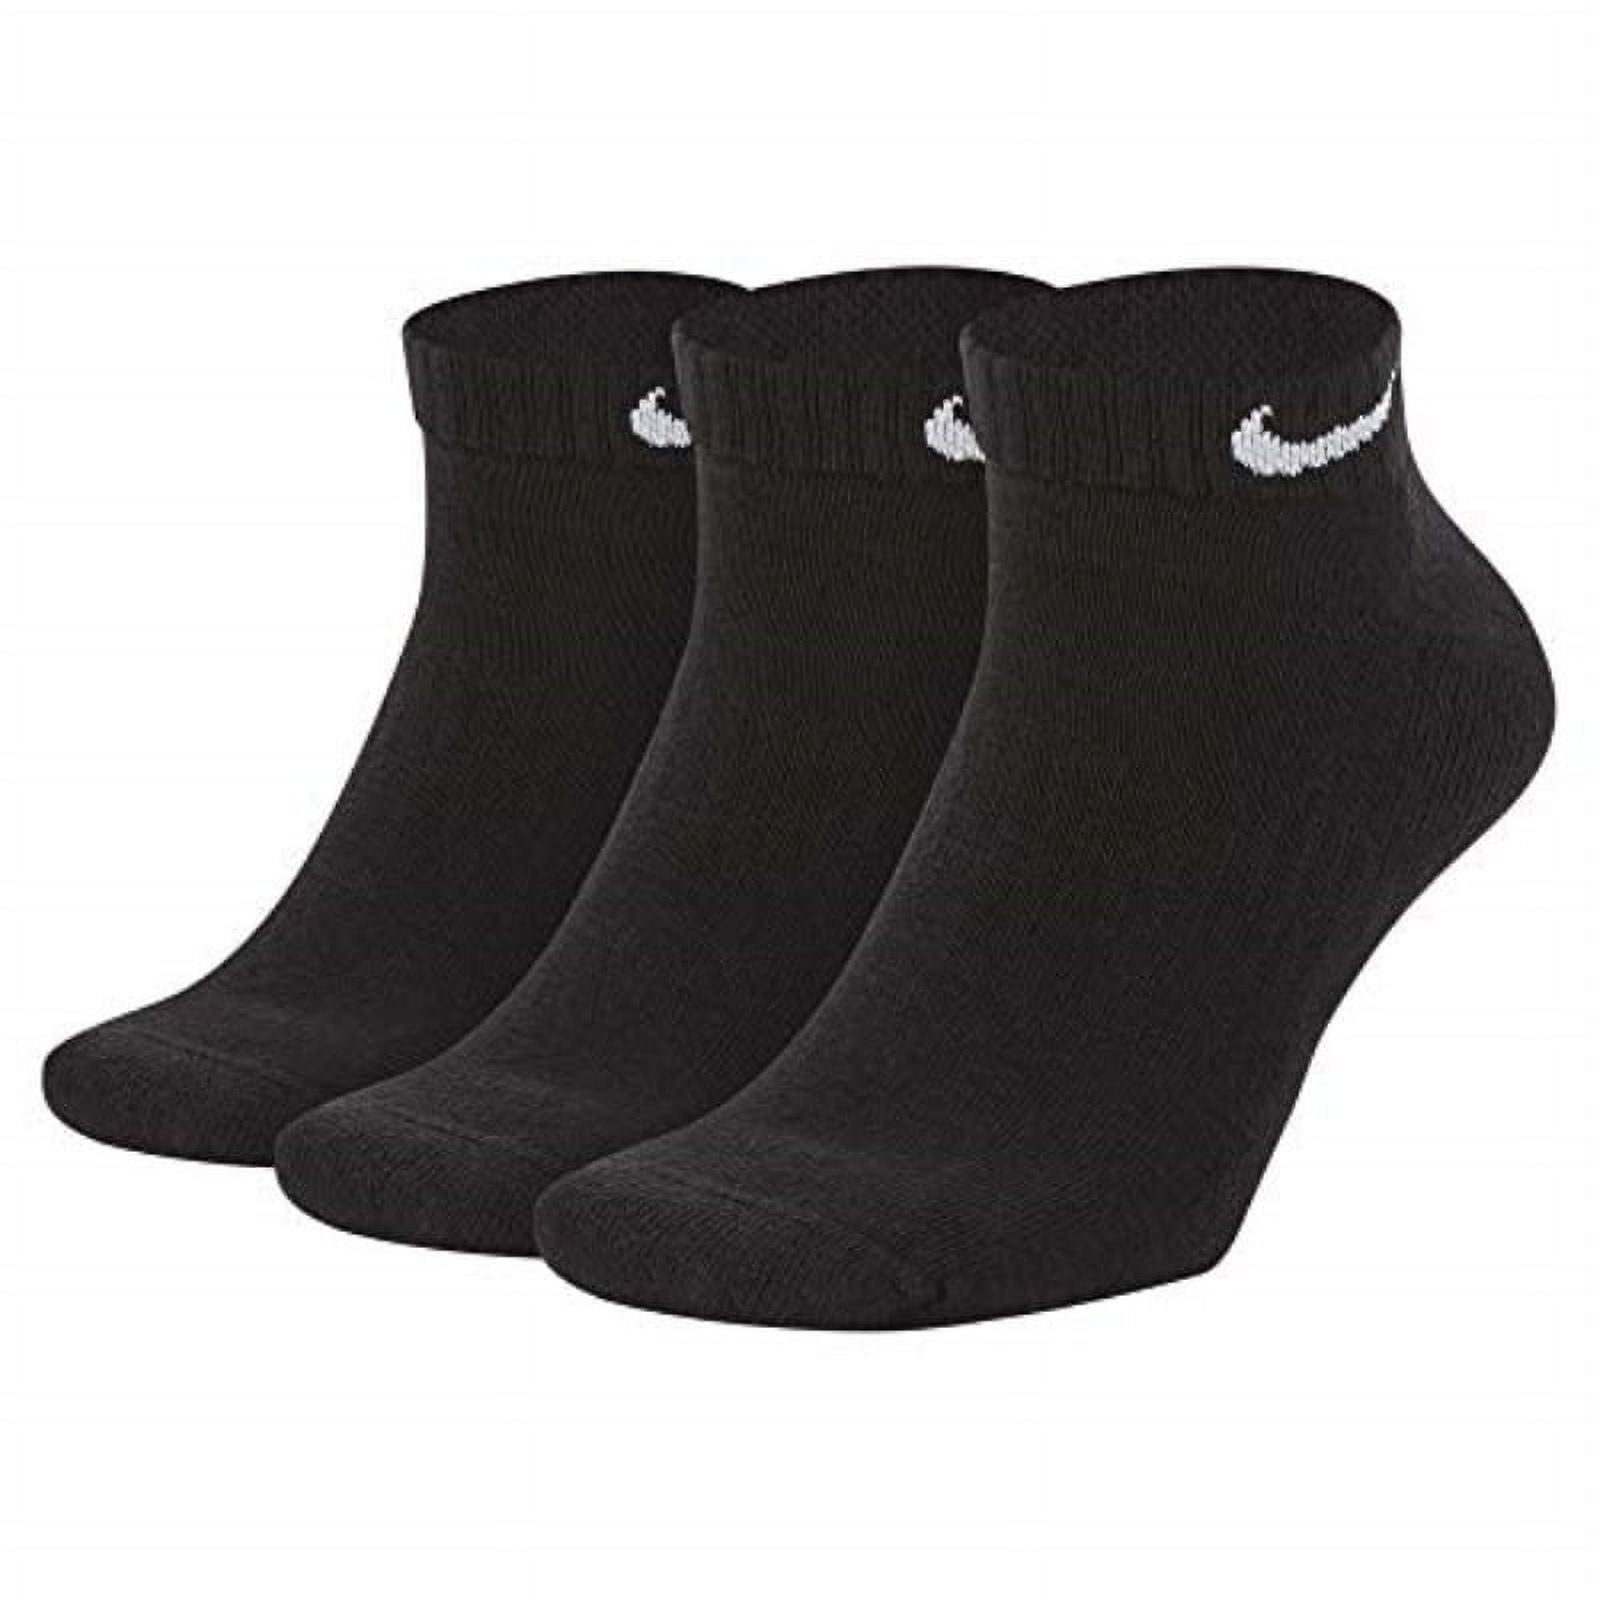 Nike Everyday Cotton Cushioned Low Cut Training Socks with Sweat ...